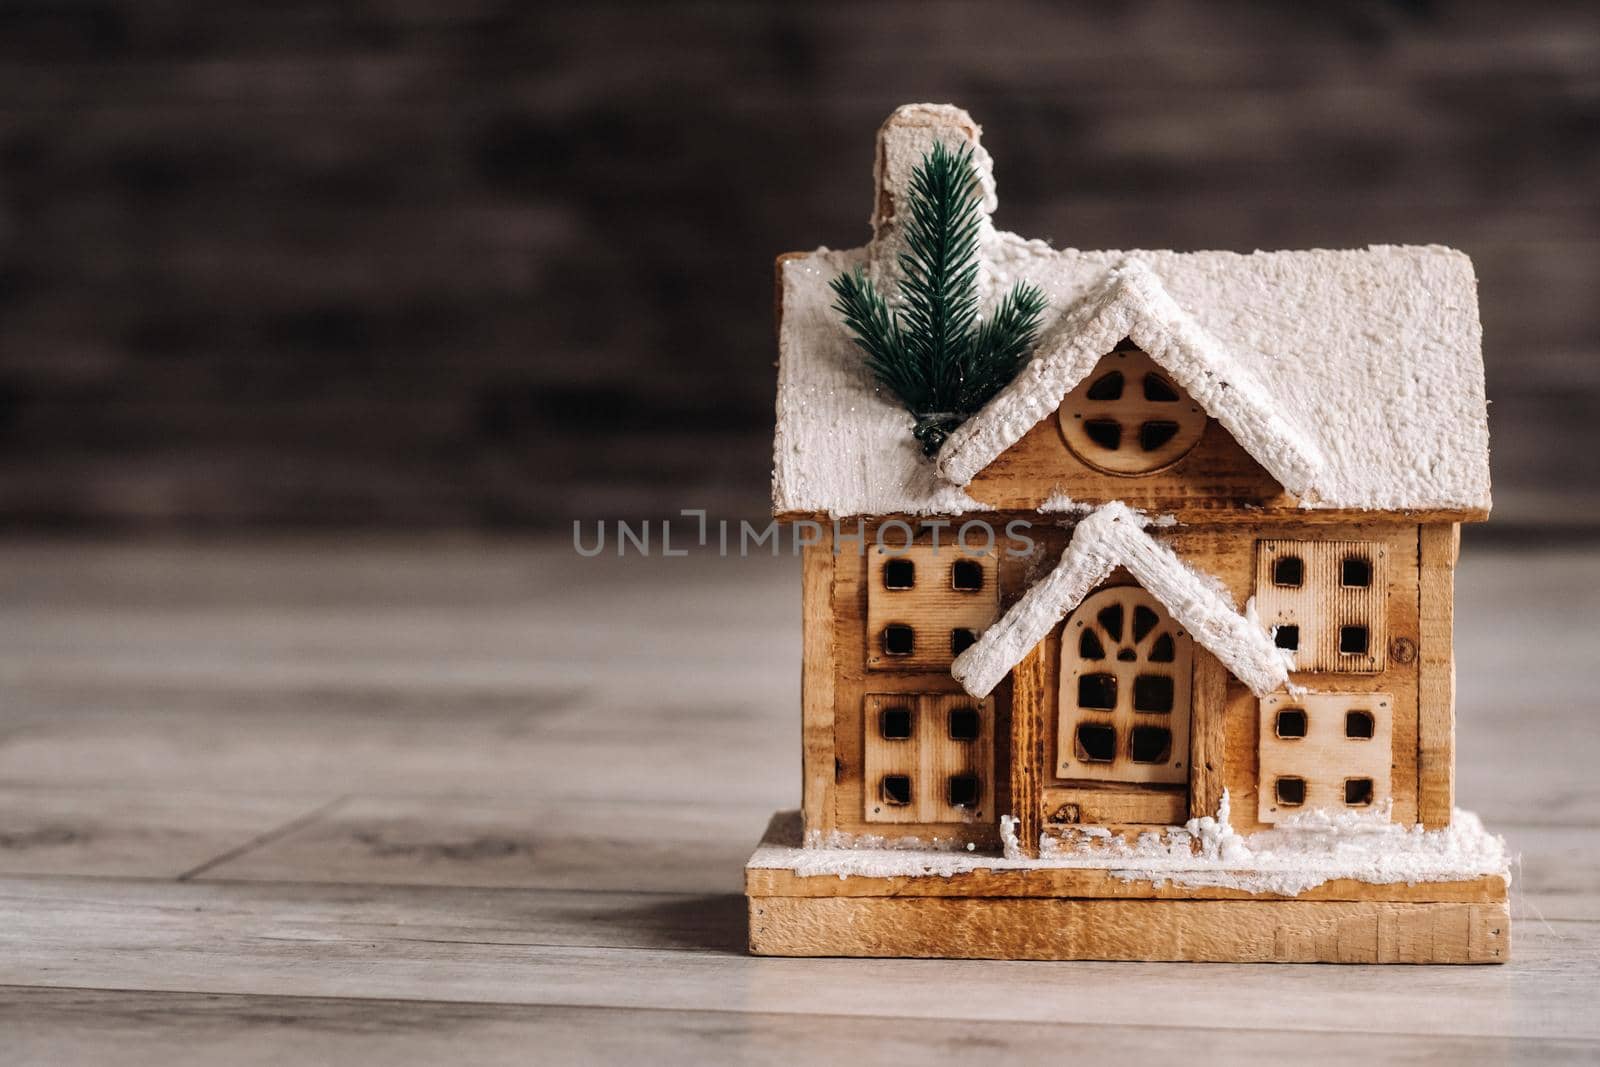 small snow-covered Christmas house on the floor of the house.Winter house decorative.